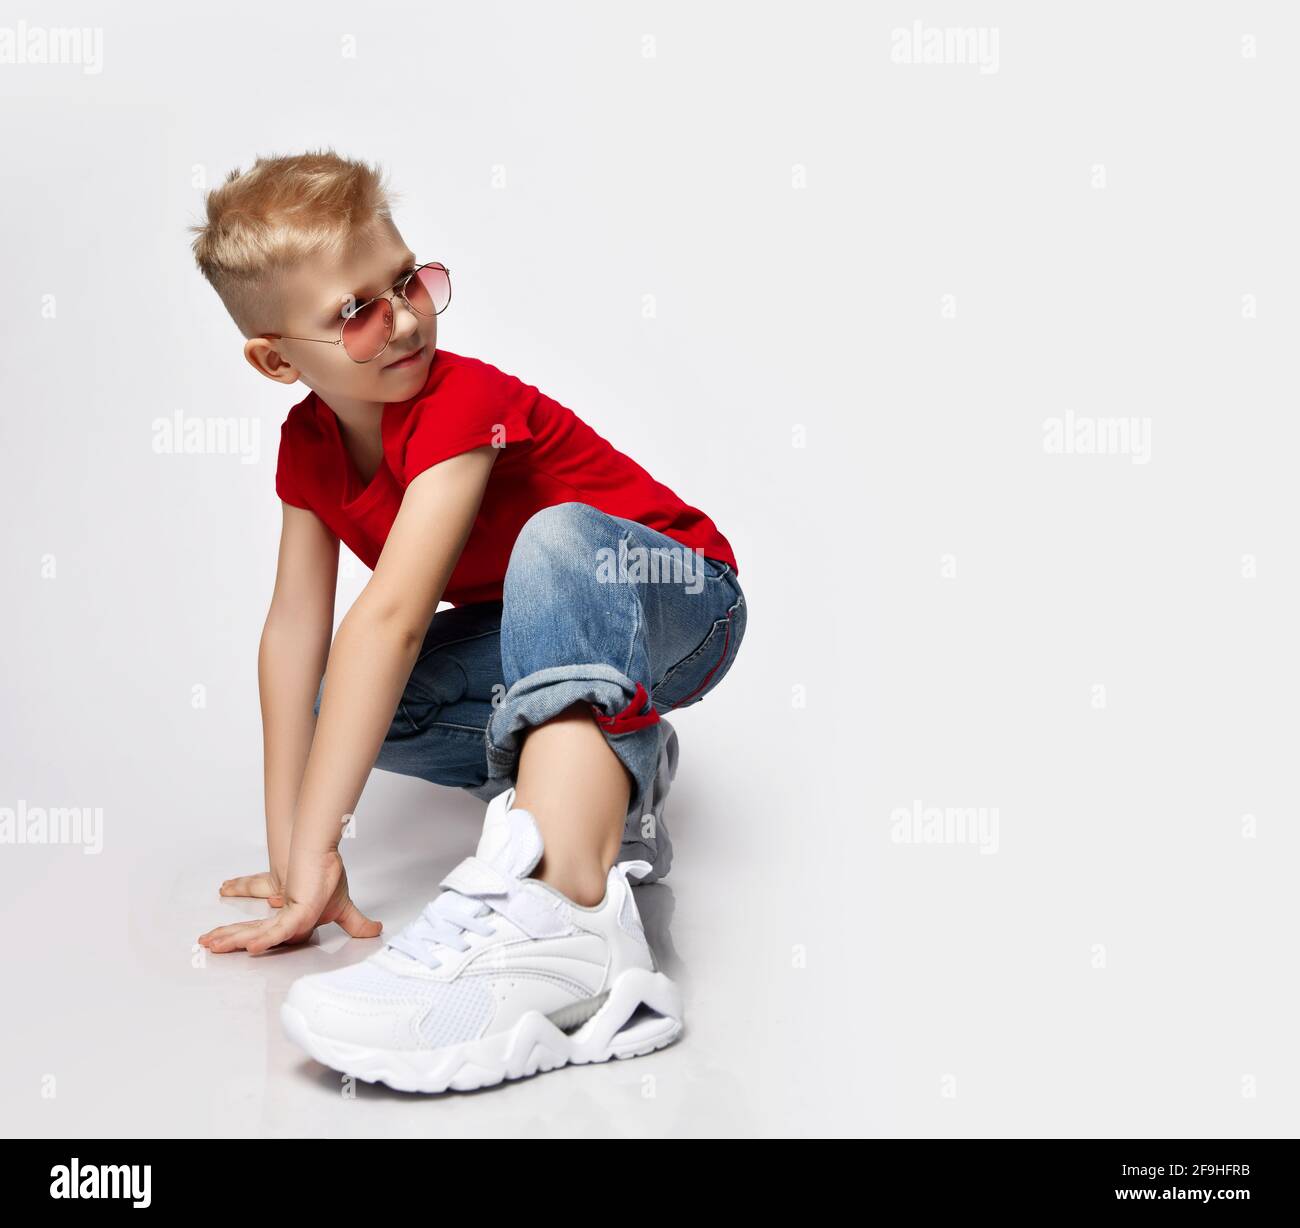 Active, frolic blonde kid boy in red t-shirt, blue jeans, white sneakers and sunglasses is in ready to run position Stock Photo